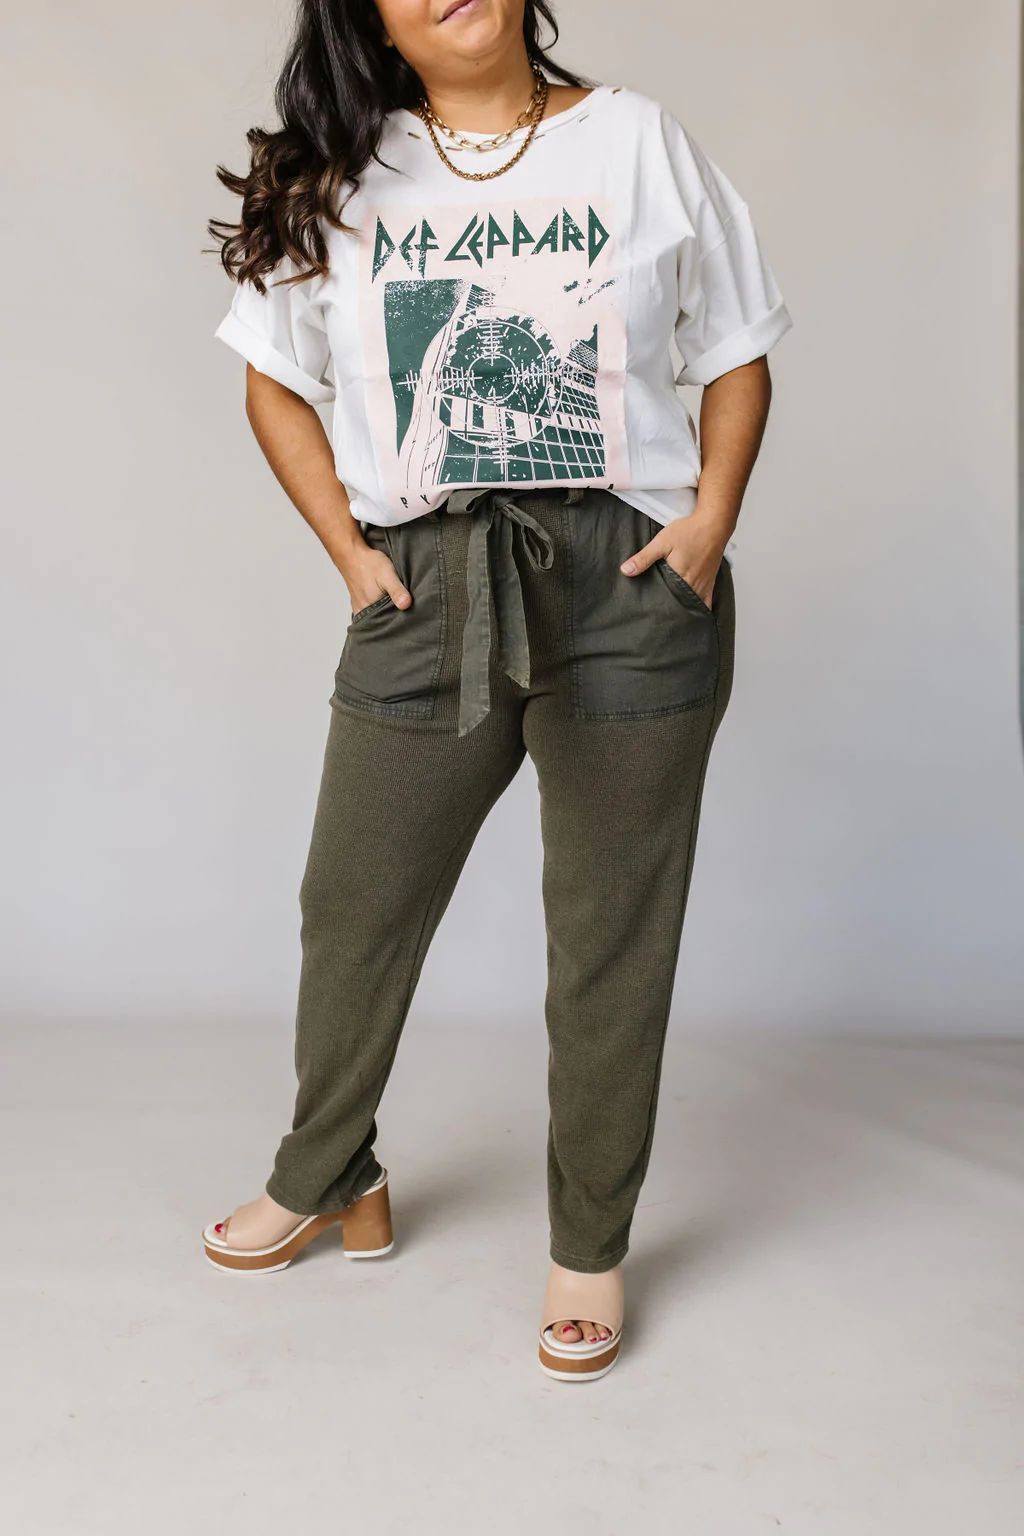 All Day Thermal Pants - Olive | Mindy Mae's Market